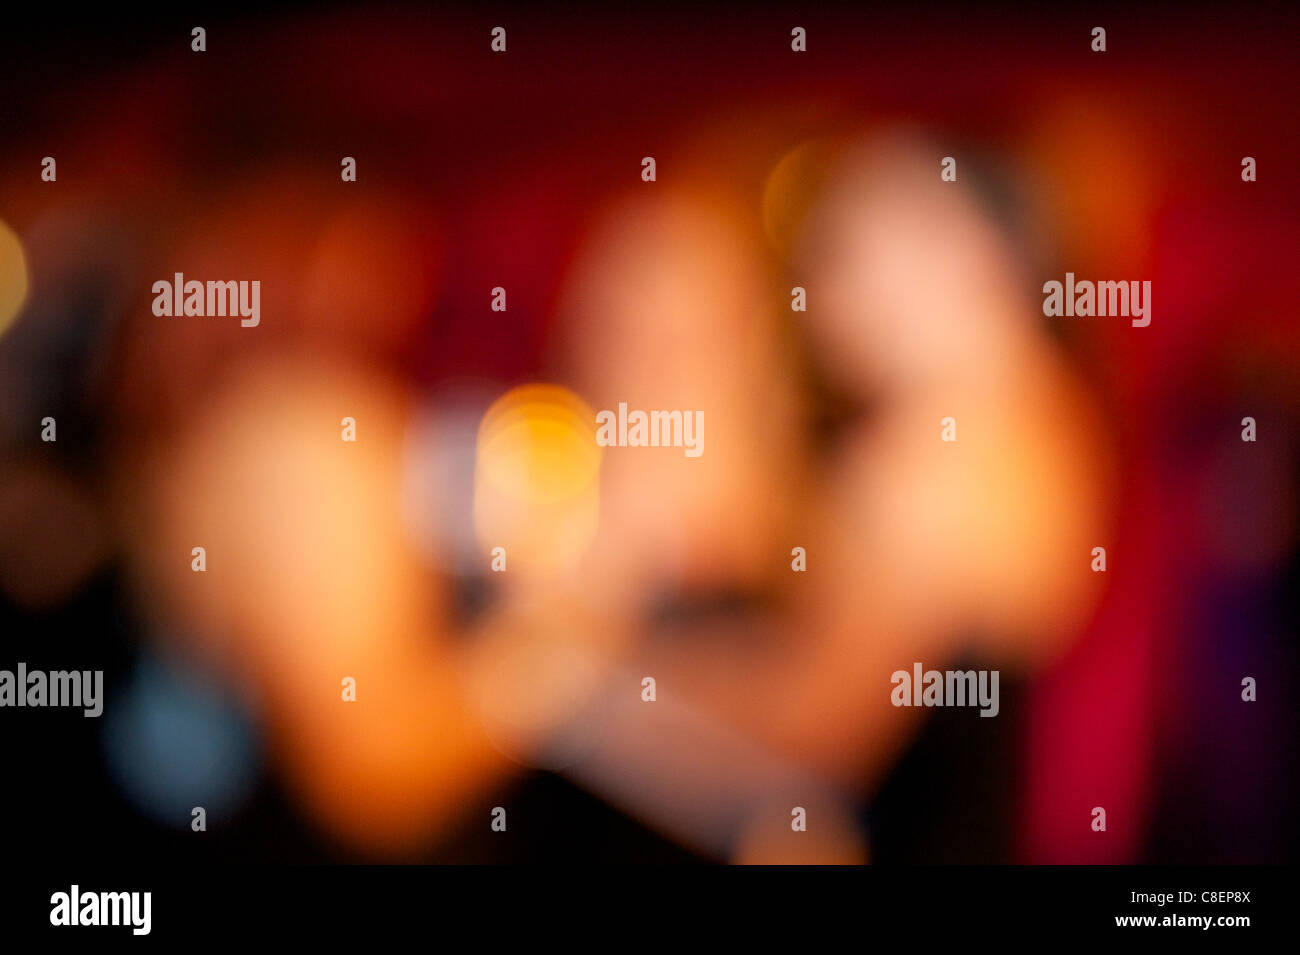 Abstract blur background of people at a party Stock Photo